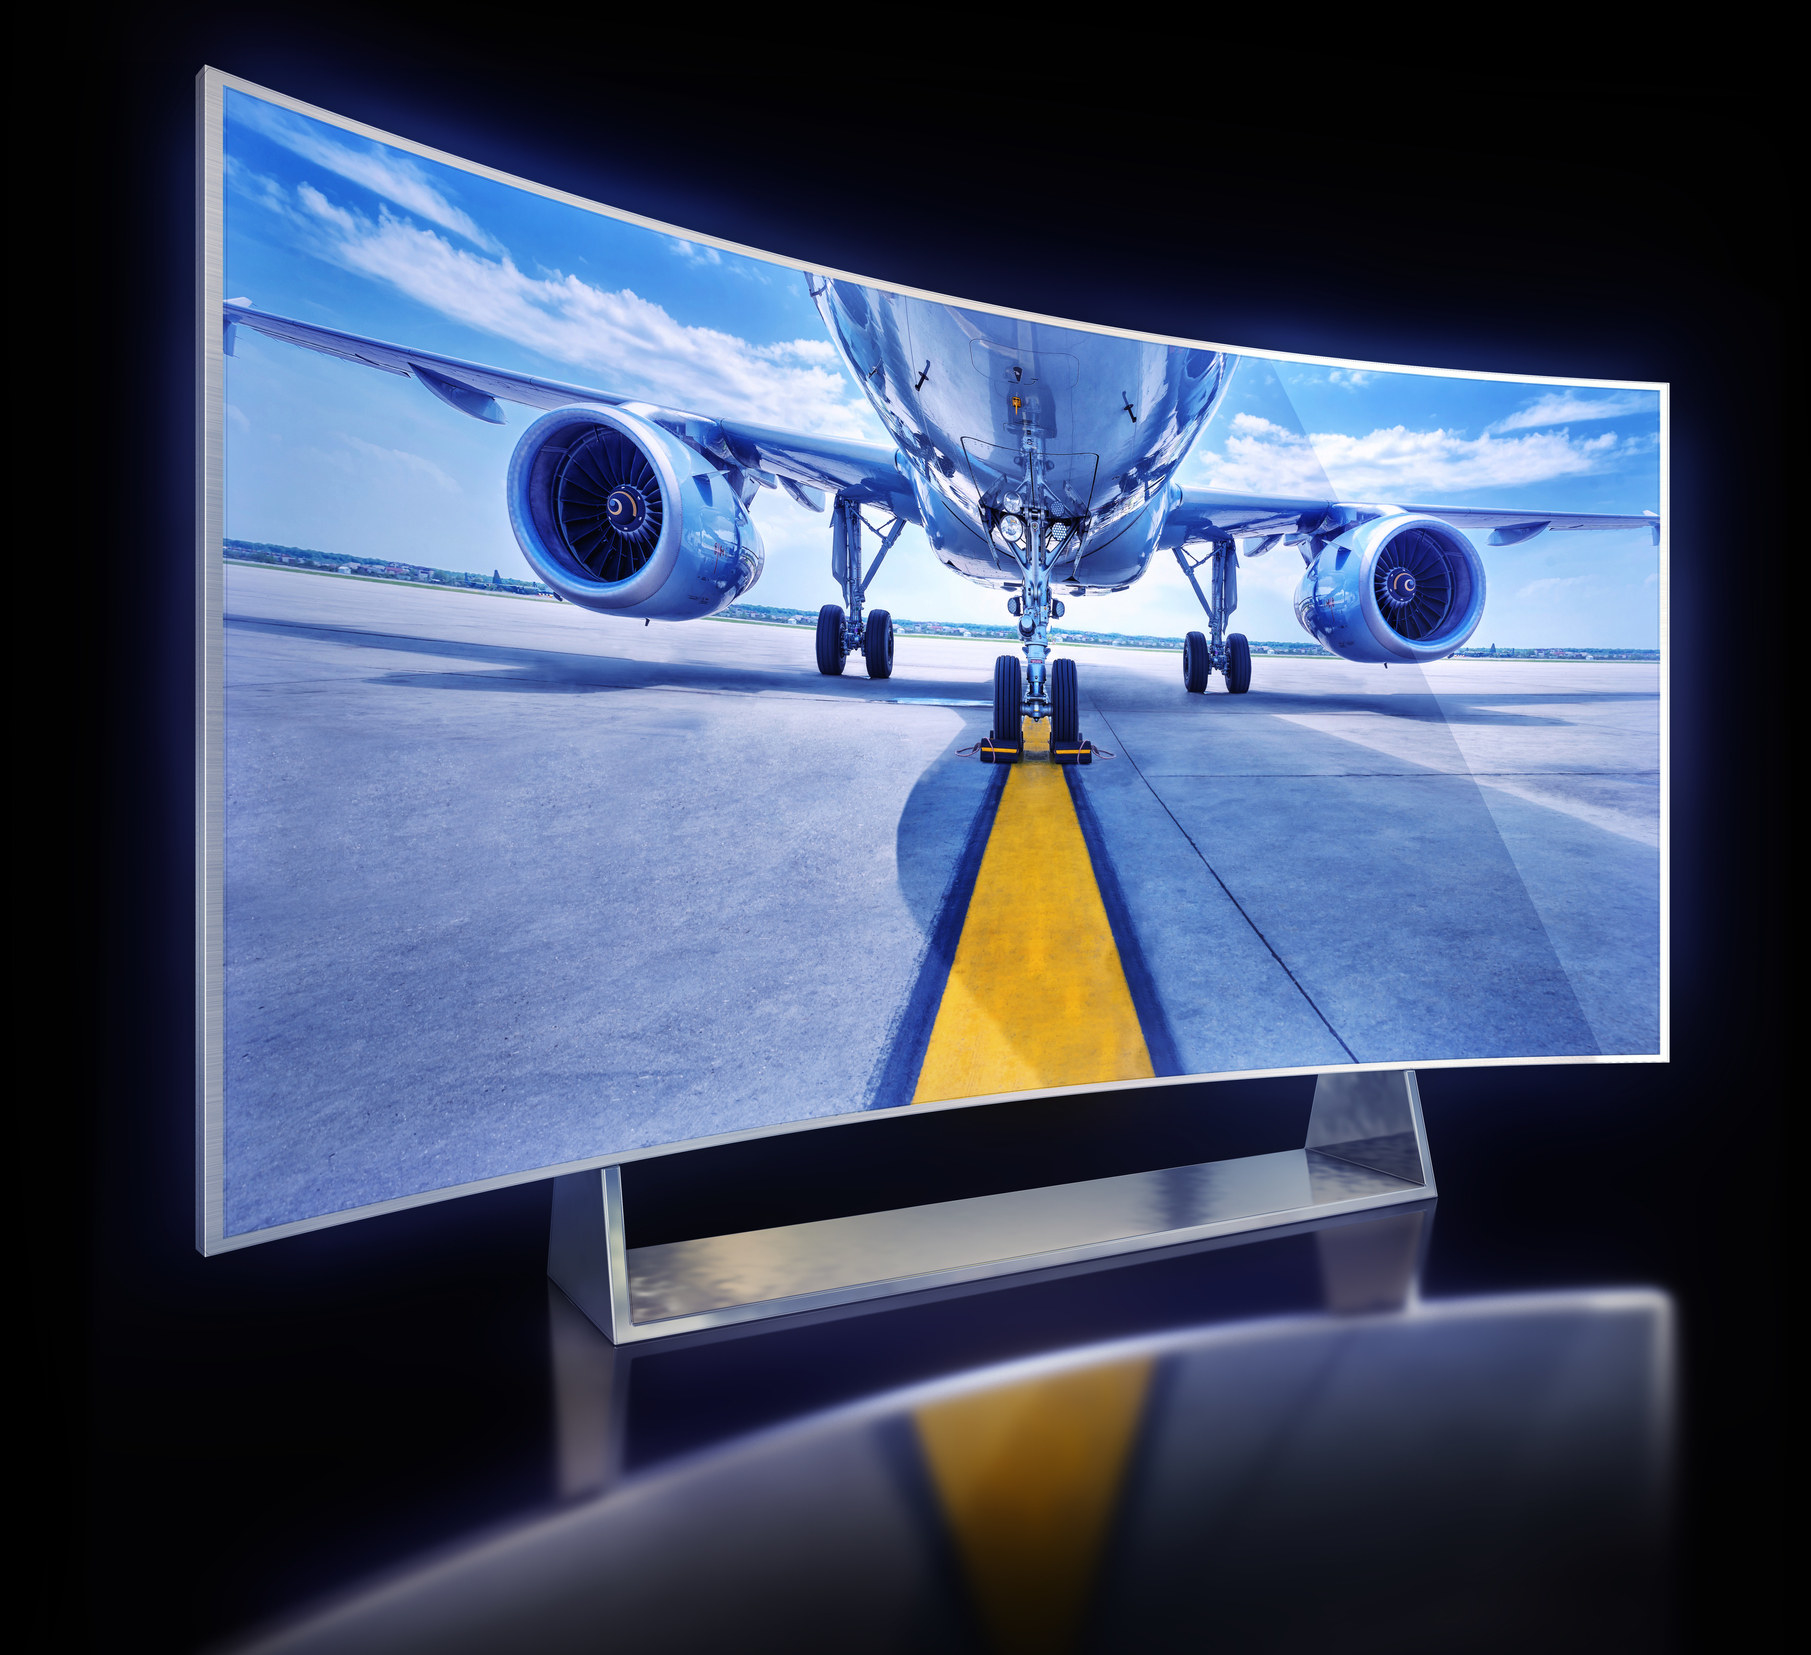 A curved TV screen